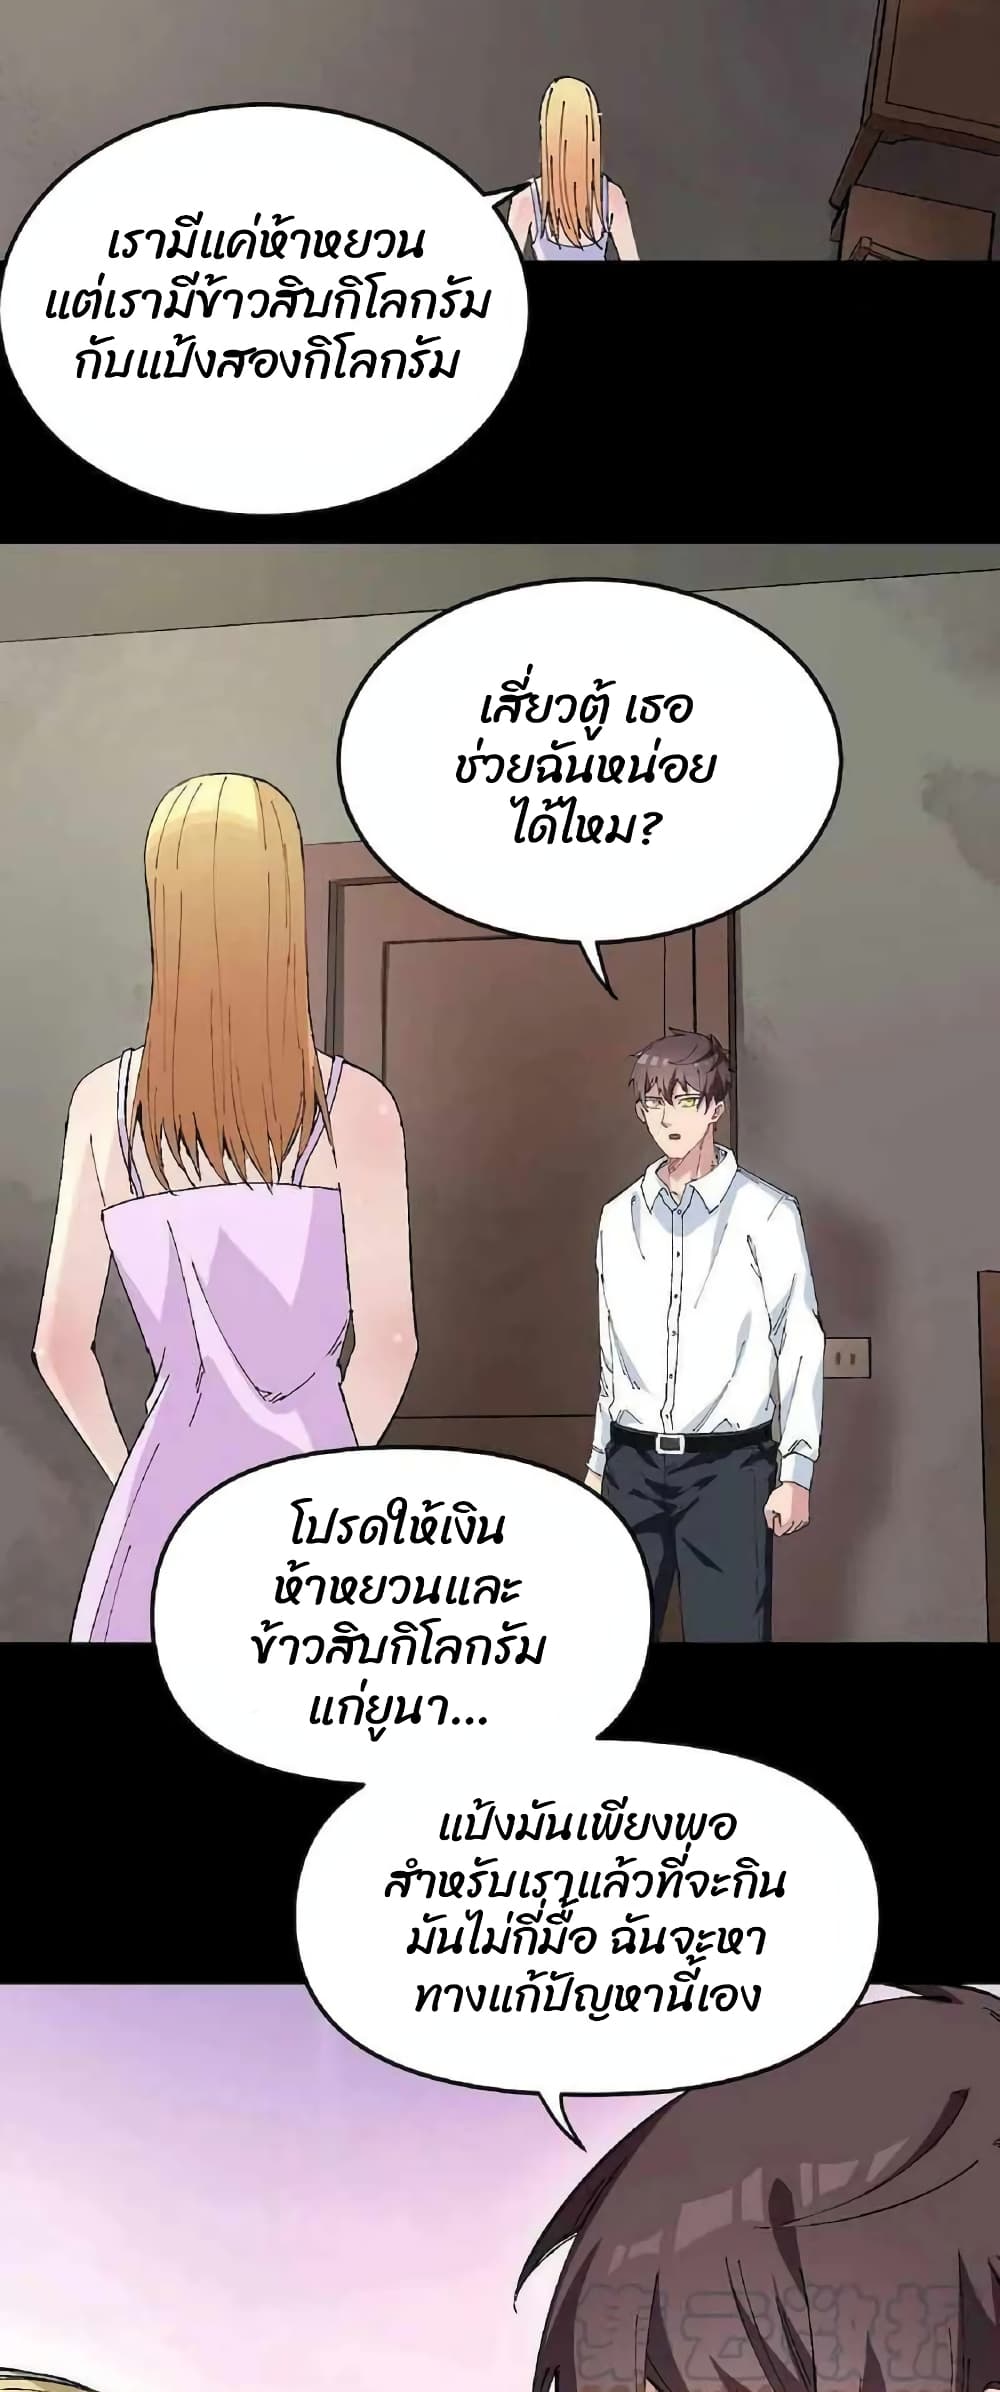 Rebirth Back to 1983 to Be a Millionaire ตอนที่ 1 (26)